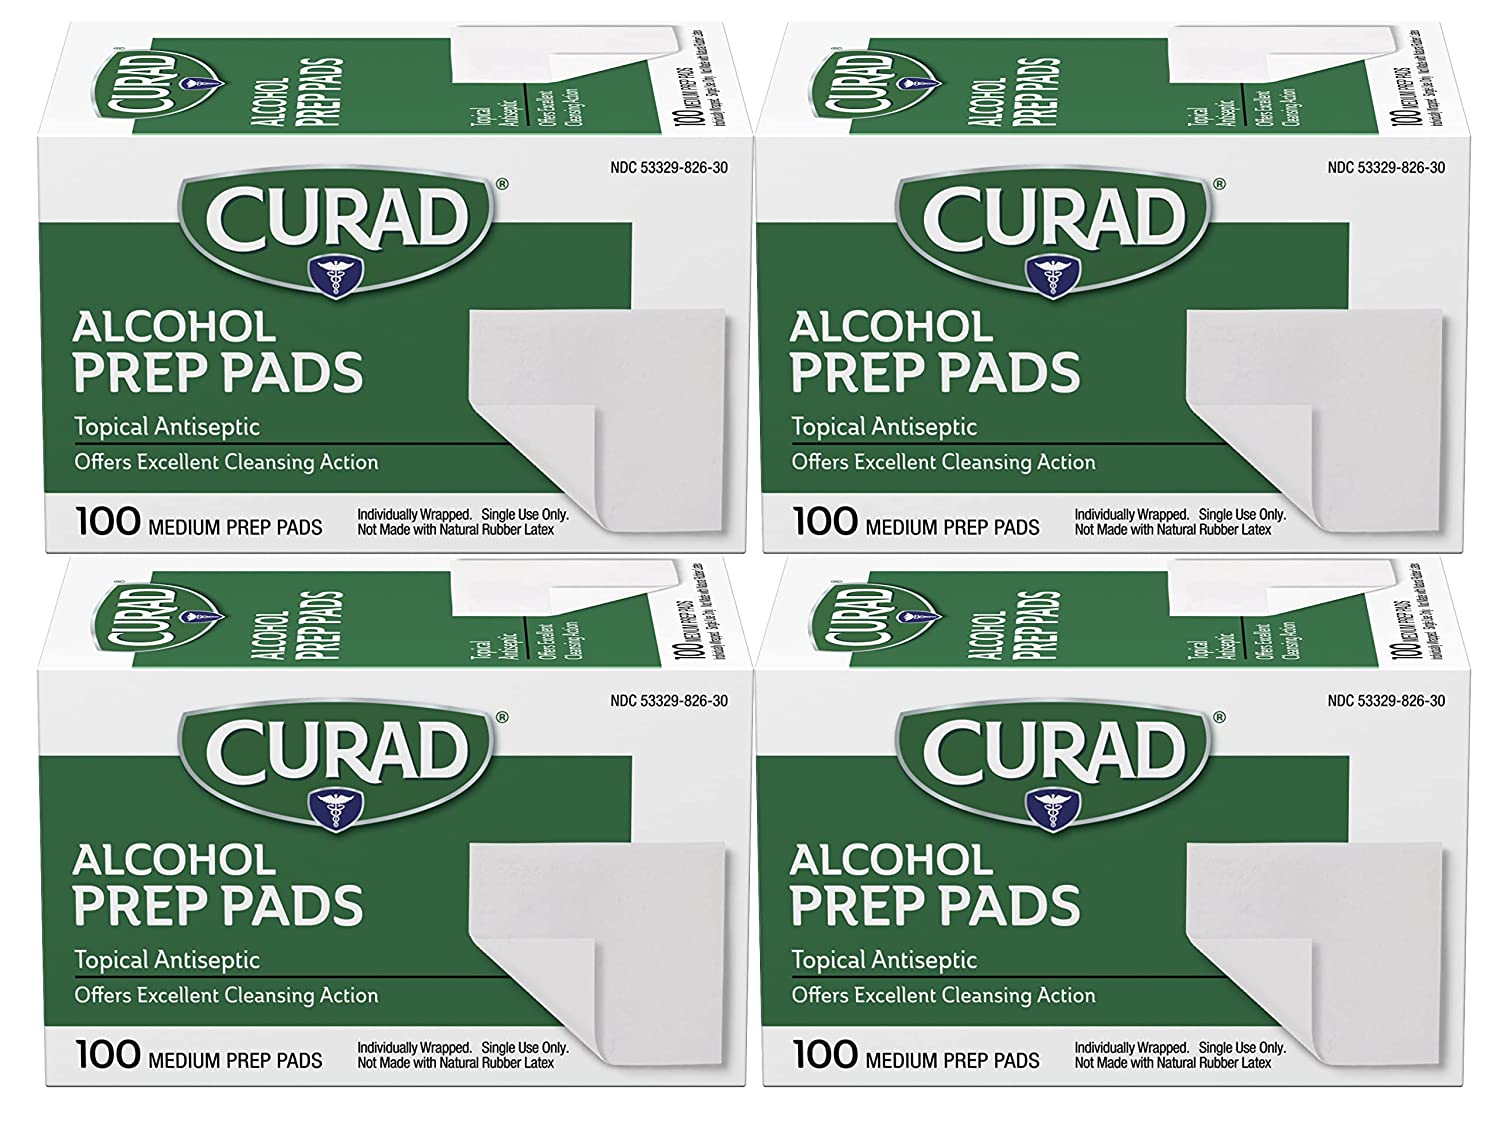 4-Pack 100-Count Curad Alcohol Prep Pads $4.49 + Free Shipping w/ Prime or on orders over $25